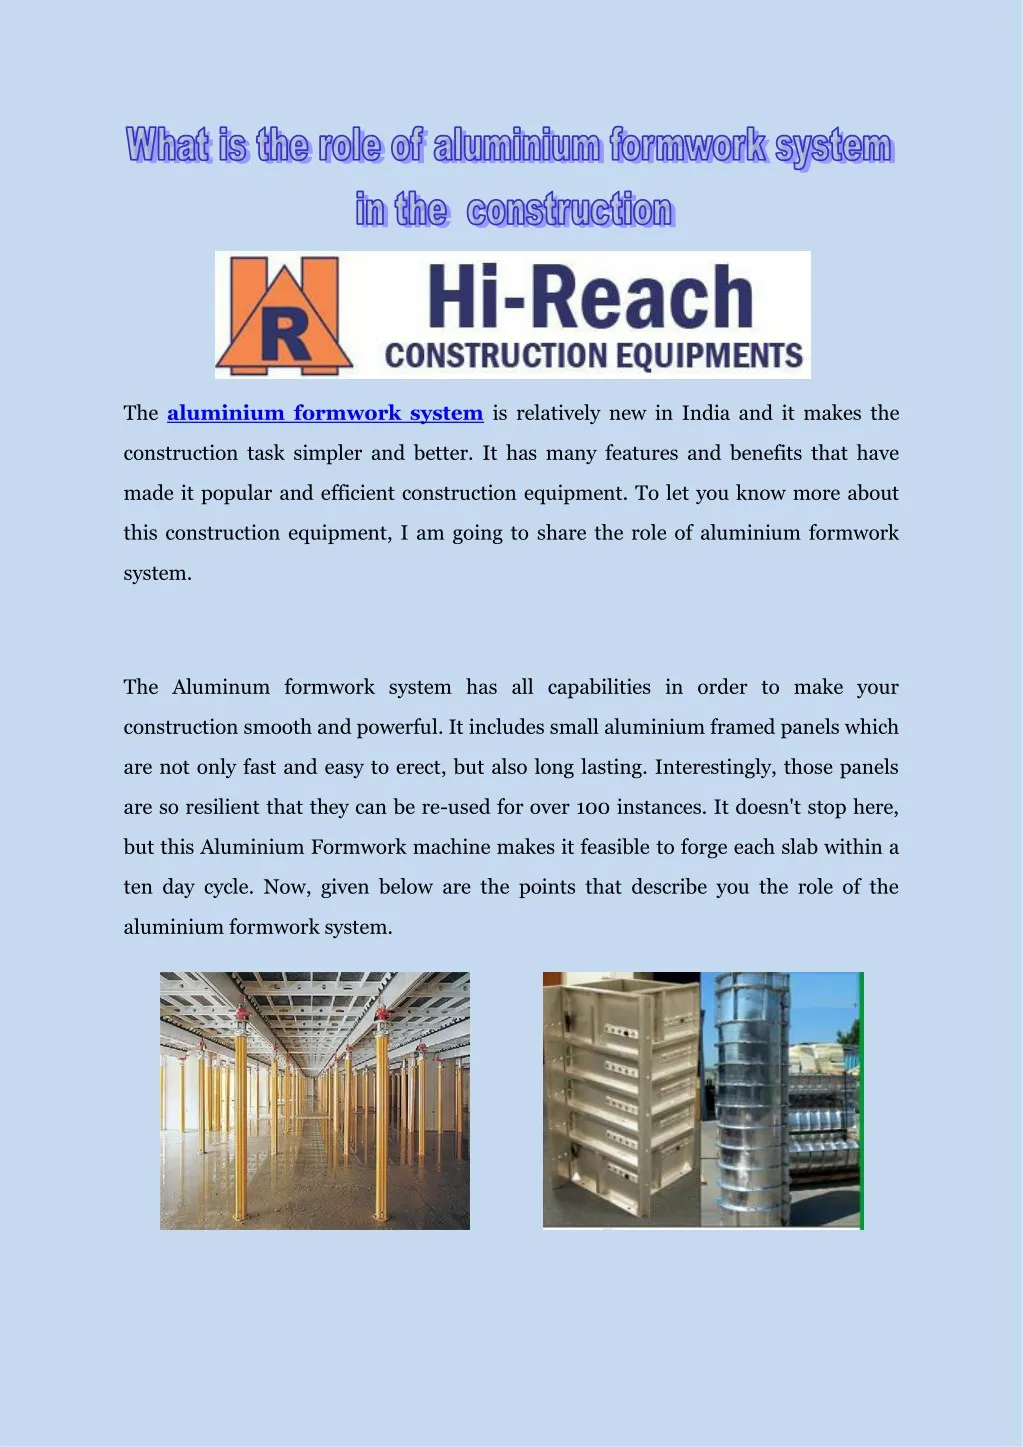 the aluminium formwork system is relatively